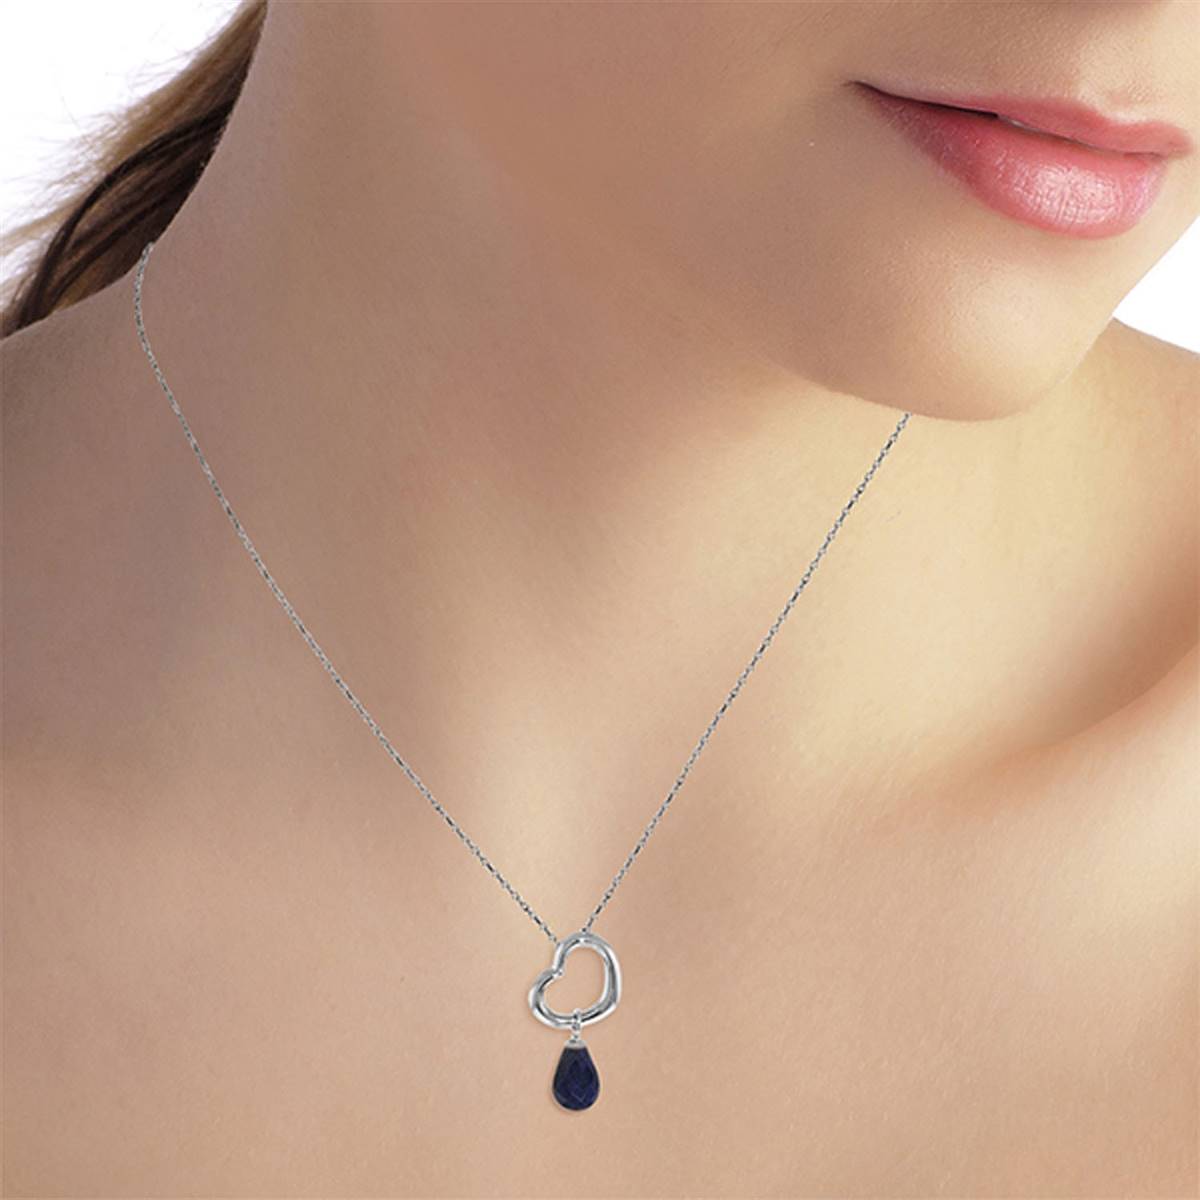 14K Solid White Gold Heart Necklace w/ Dangling Natural Sapphire